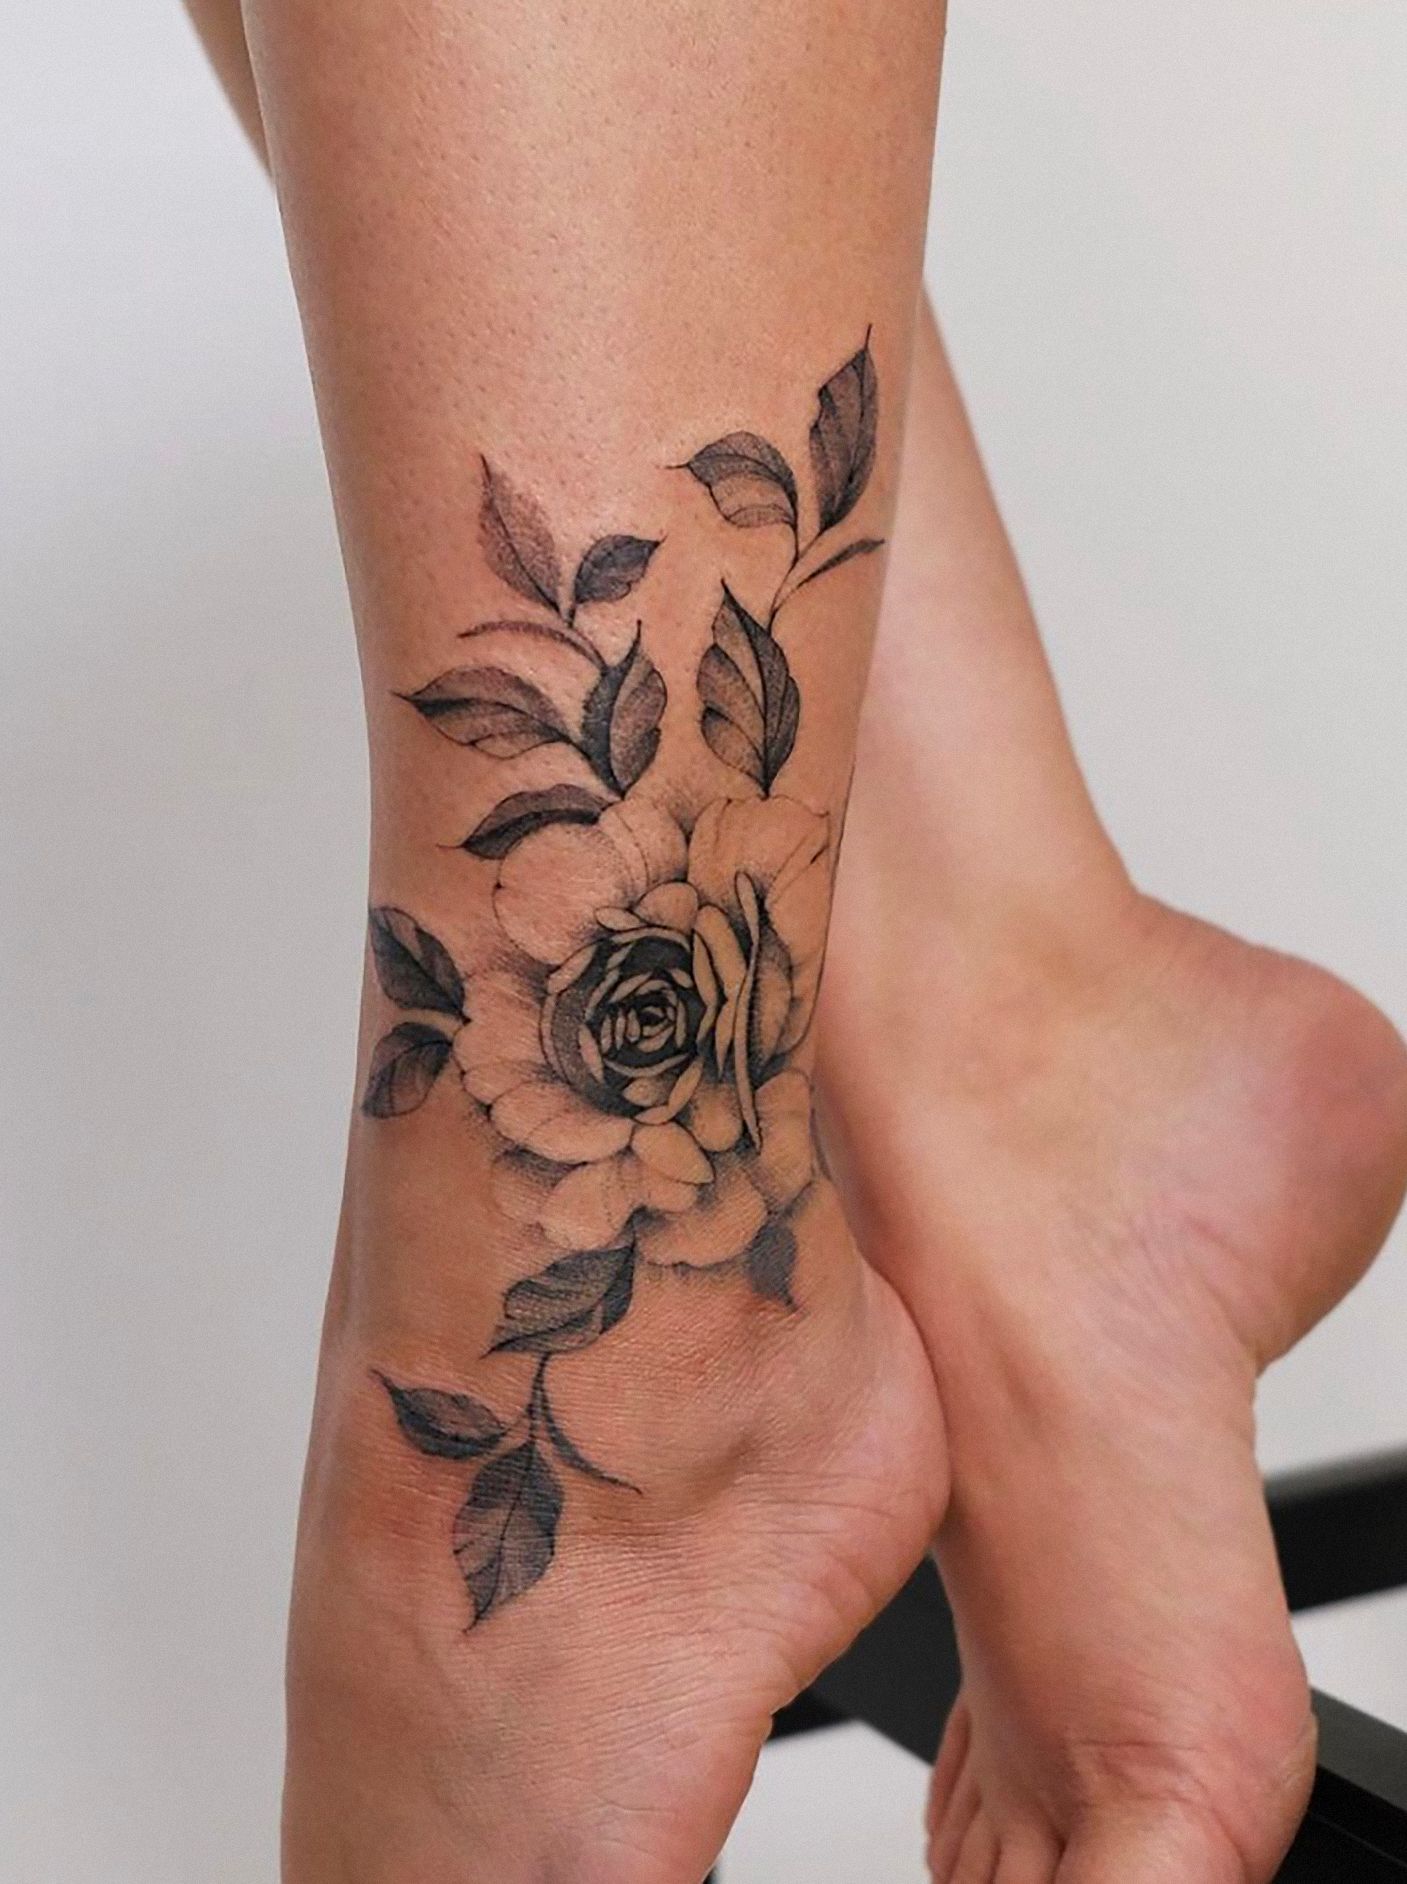 Floral Foot Tattoo for Flower Tattoo Ideas for Women #tattooswomensdesigns  | Floral foot tattoo, Foot tattoos, Flower tattoos